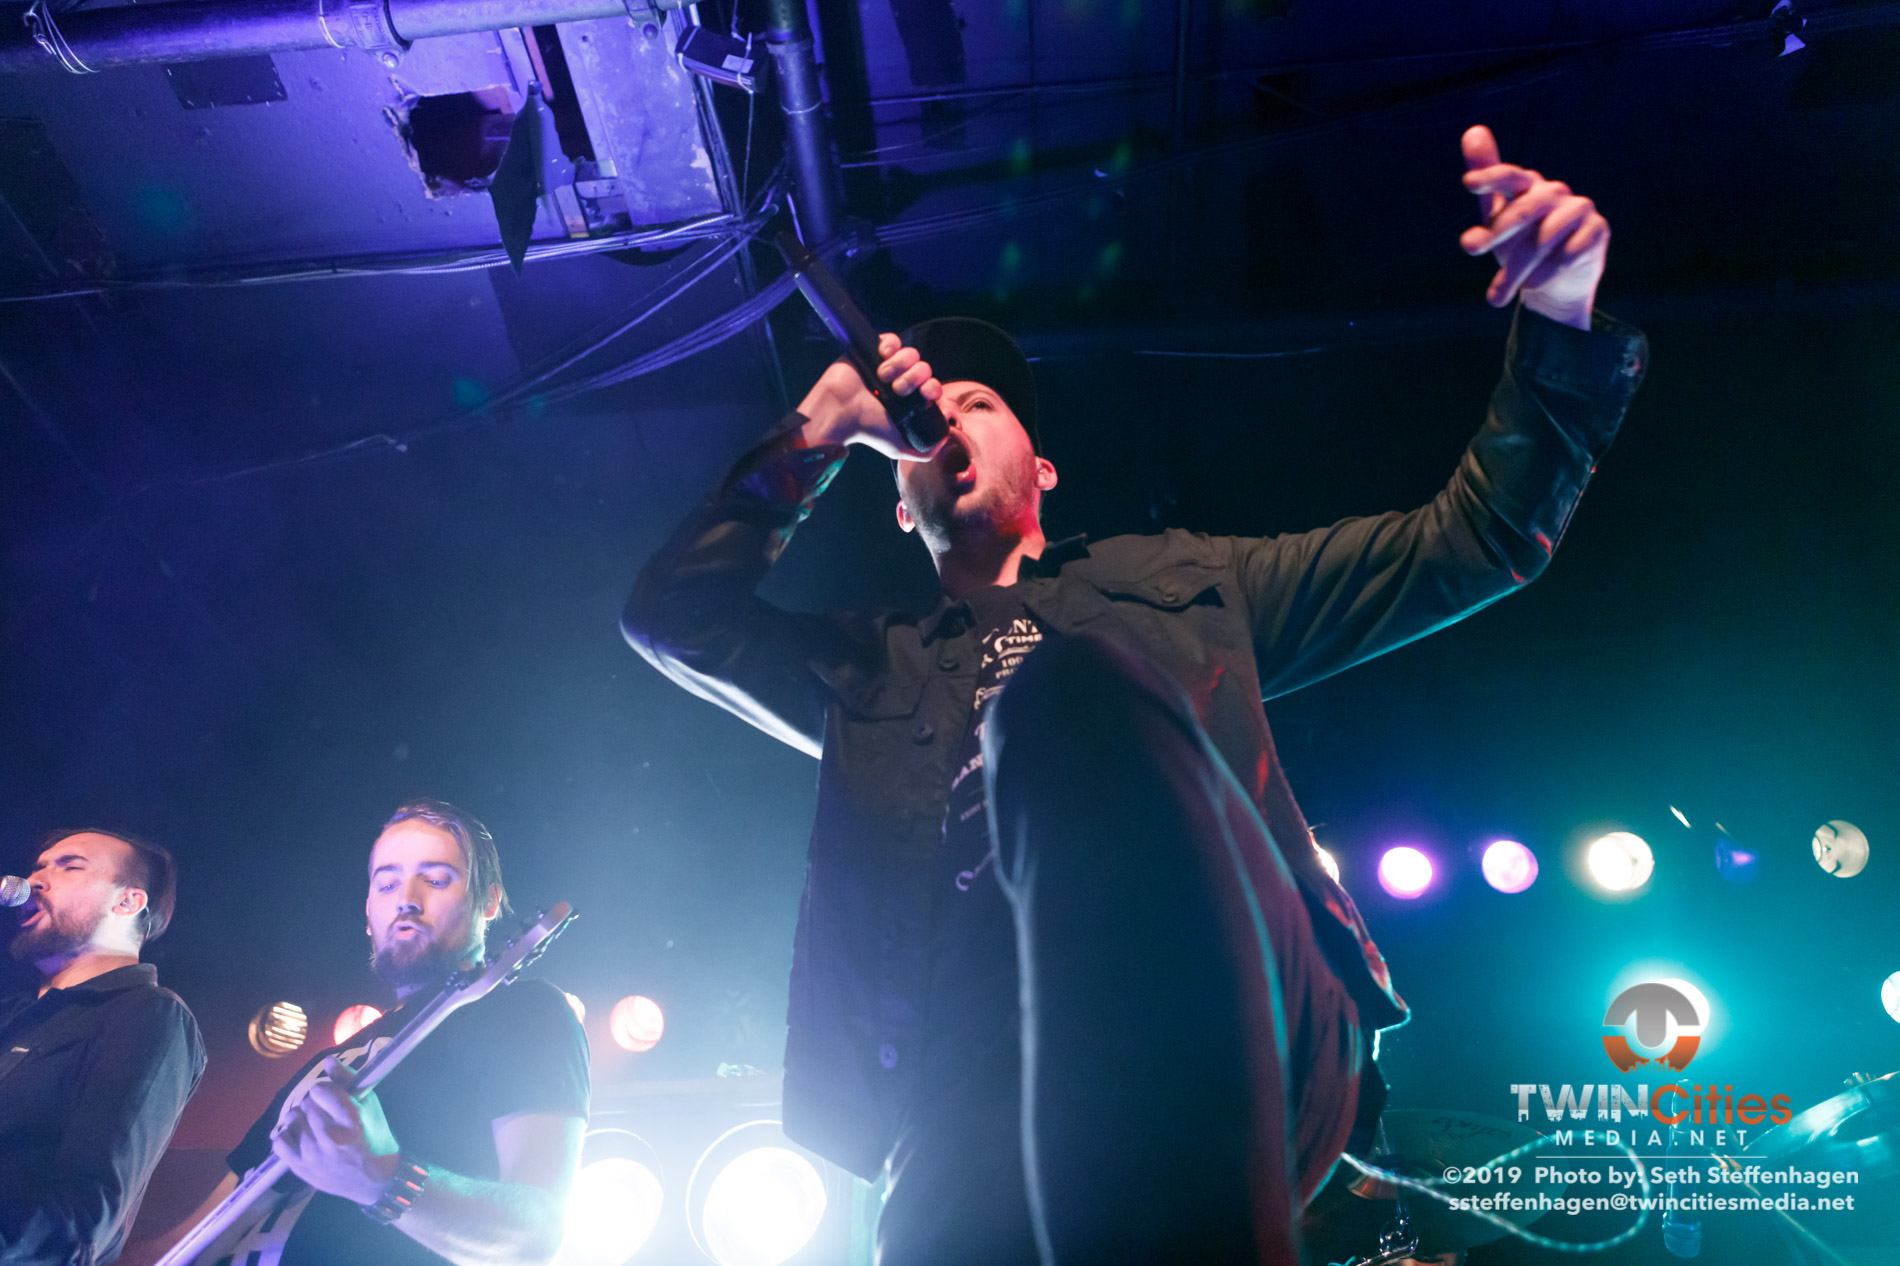 March 12, 2019 - Minneapolis, Minnesota, United States -  Sleep Signals live in concert at The Cabooze opening for All That Remains.

(Photo by Seth Steffenhagen/Steffenhagen Photography)